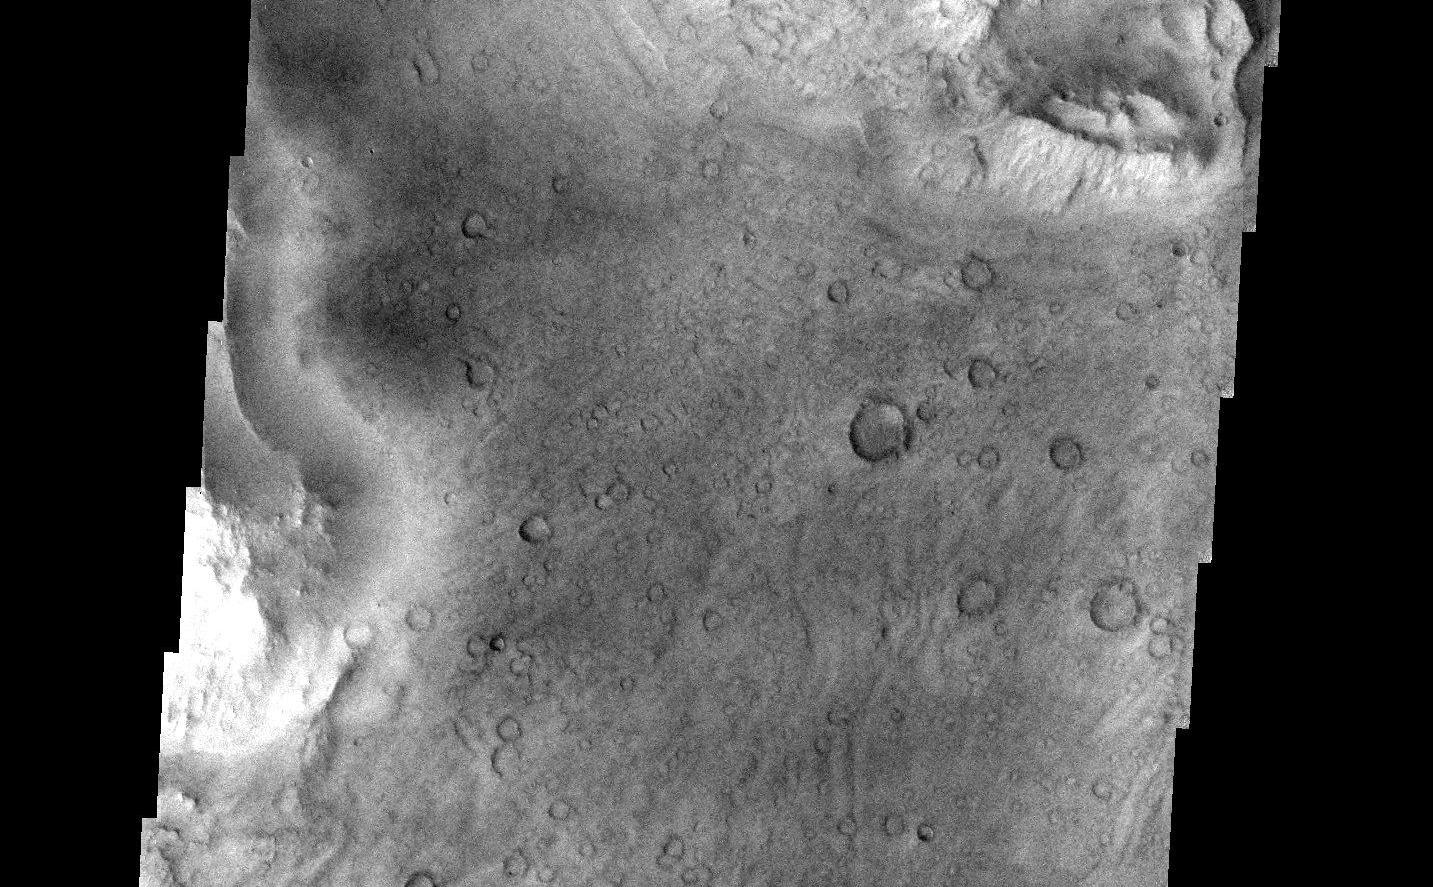 This image is located near the boundary between Syrtis Major and Isidis Planitia. The top of the image shows rough material that has eroded away from the lower portion of the image, revealing an underlying surface that has many small craters. It also reveals an ancient flow lobe that is barely discernable, crossing the southern part of the image (this flow lobe is much easier to see as a smooth region in the context image).